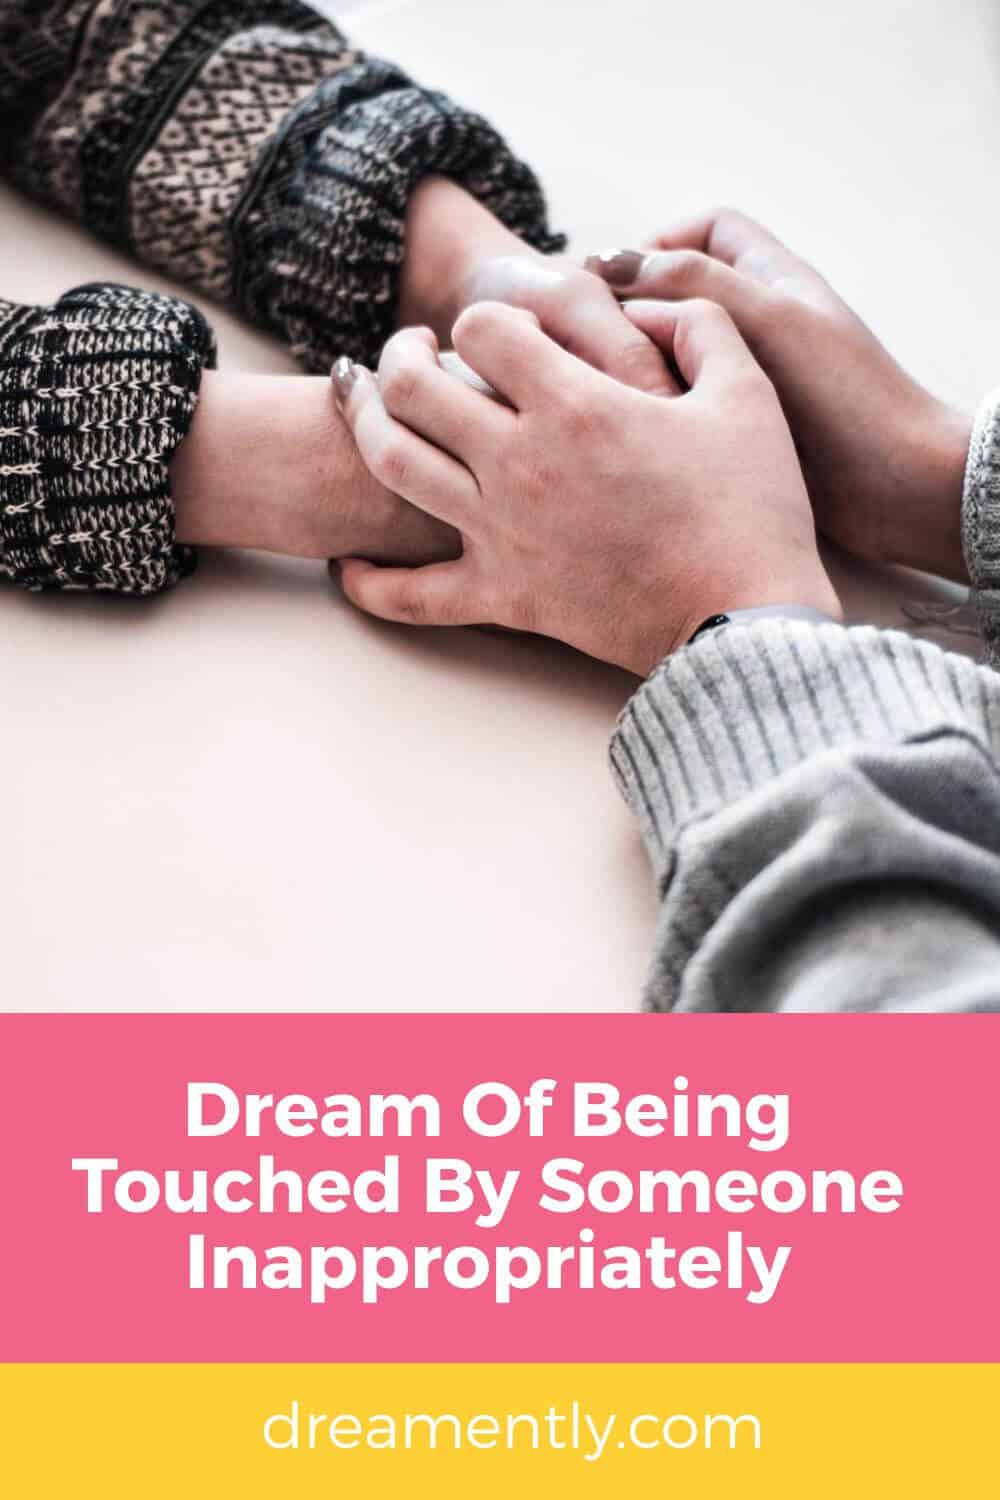 Dream Of Being Touched By Someone Inappropriately